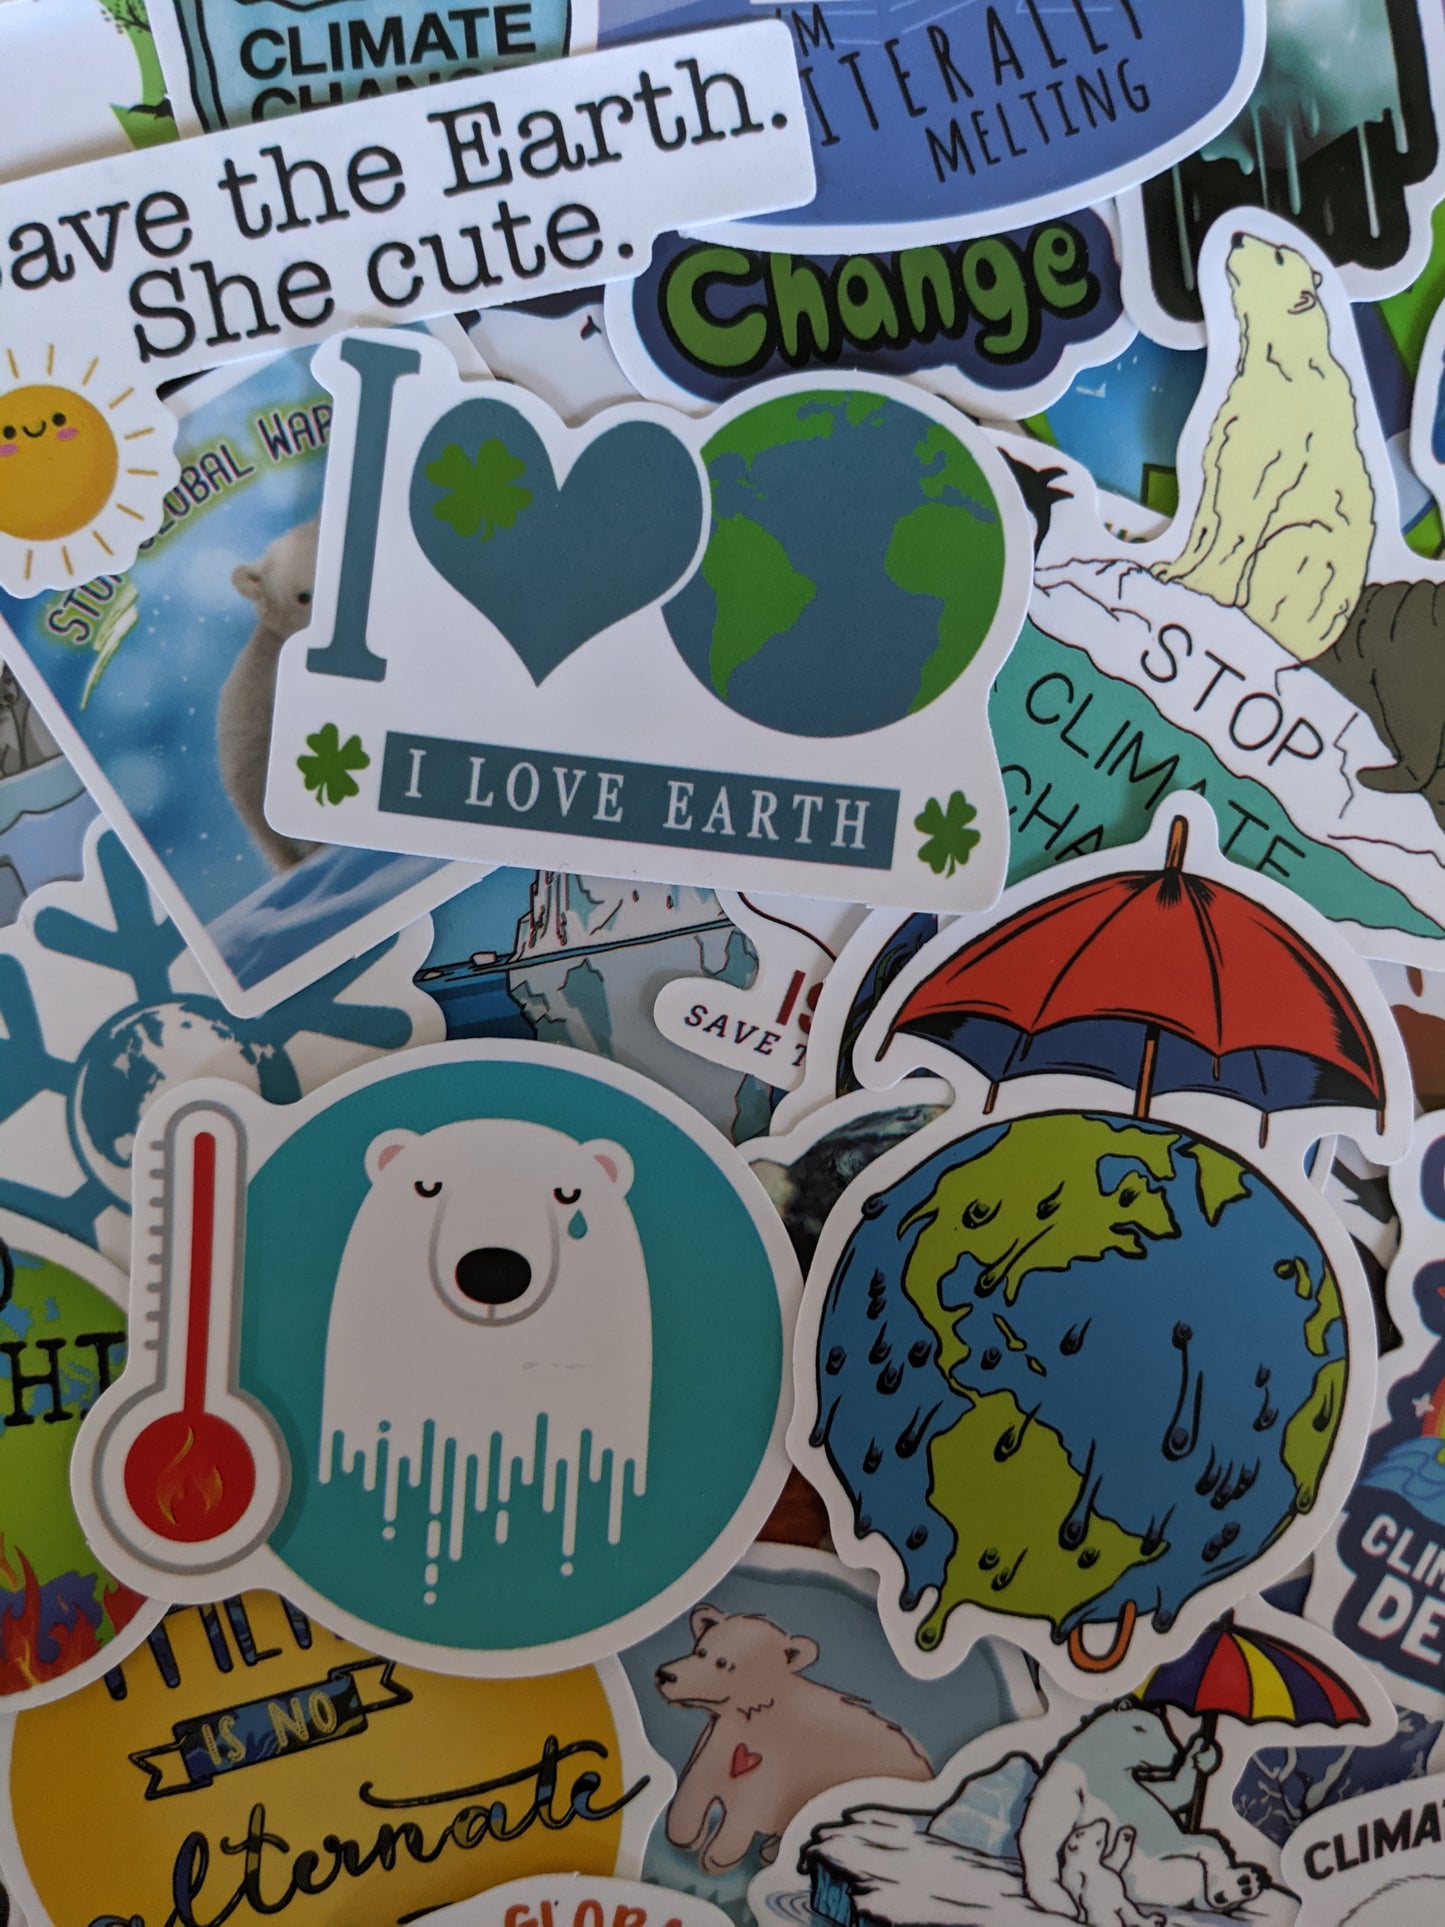 Climate Change Awareness Sticker Pack